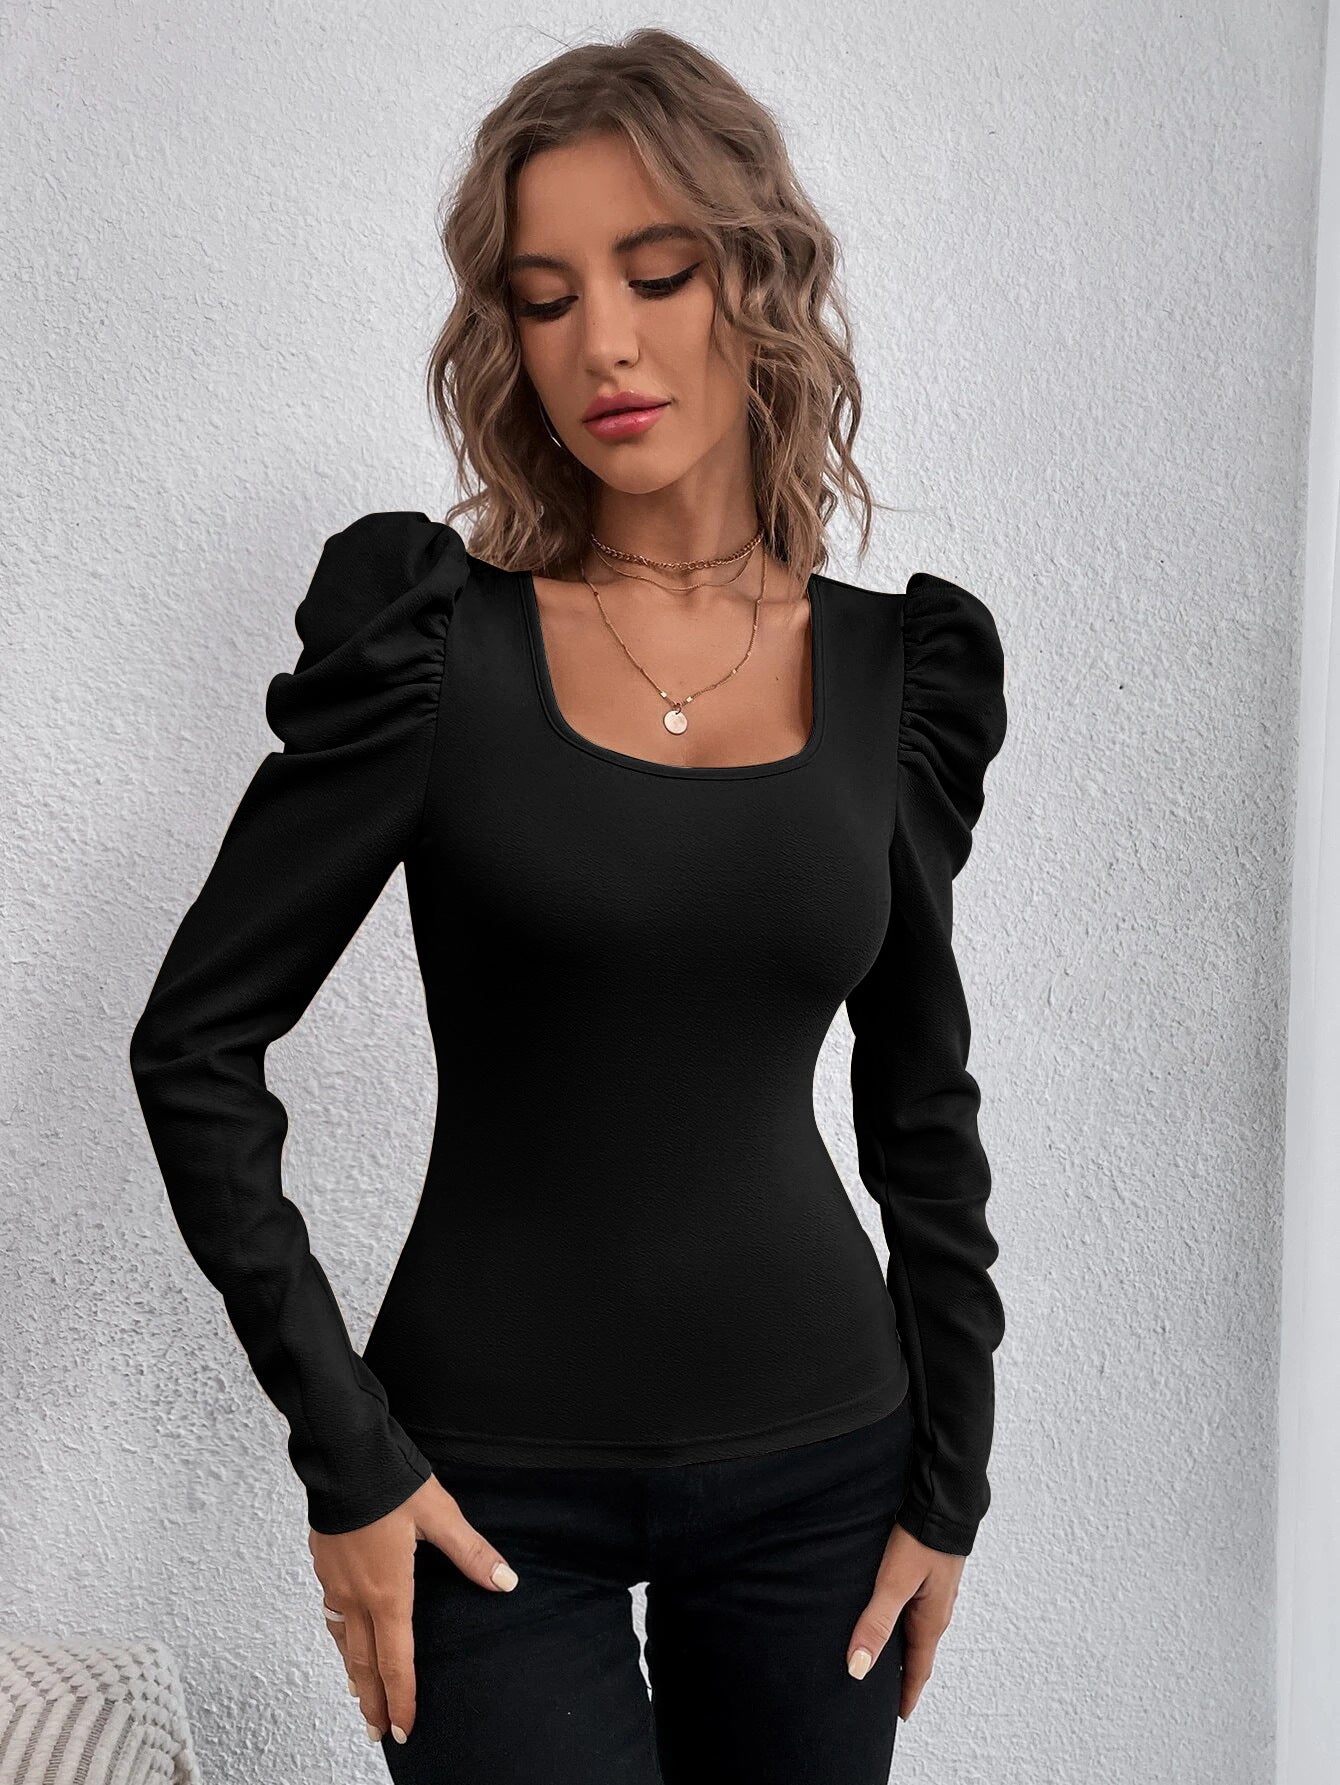 Women's Fashion Square Collar Slim-fit Knitted Long-sleeve T-shirt